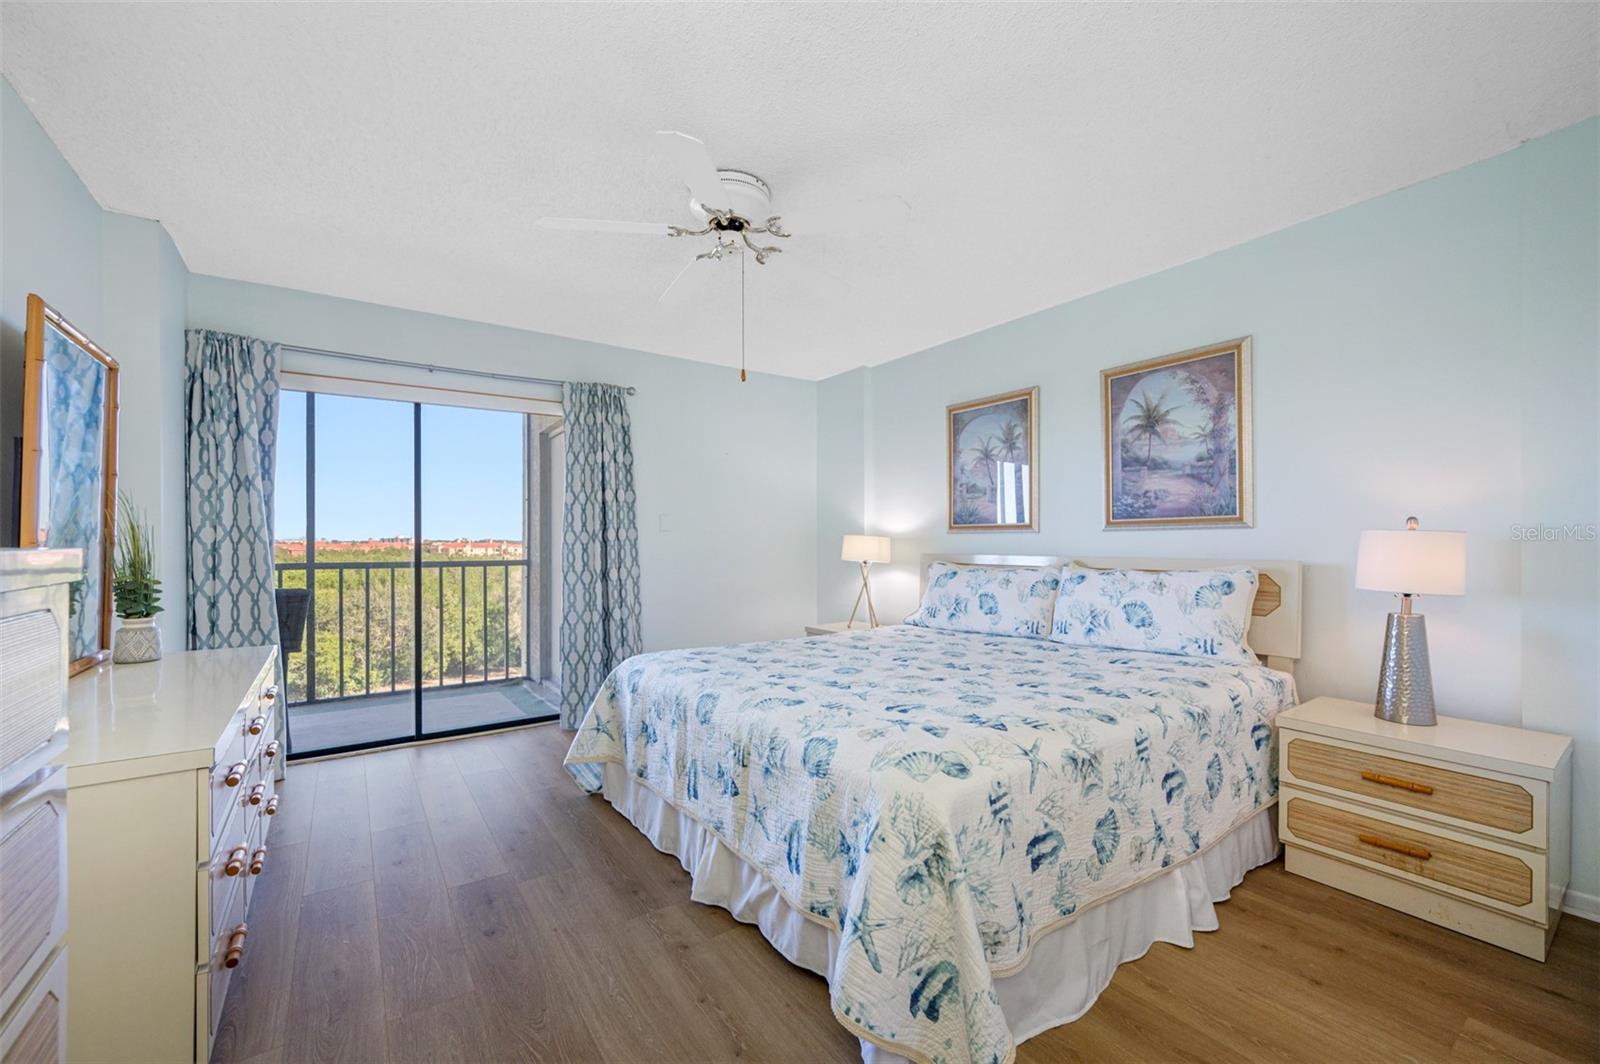 Master Bedroom with direct access to the lanai